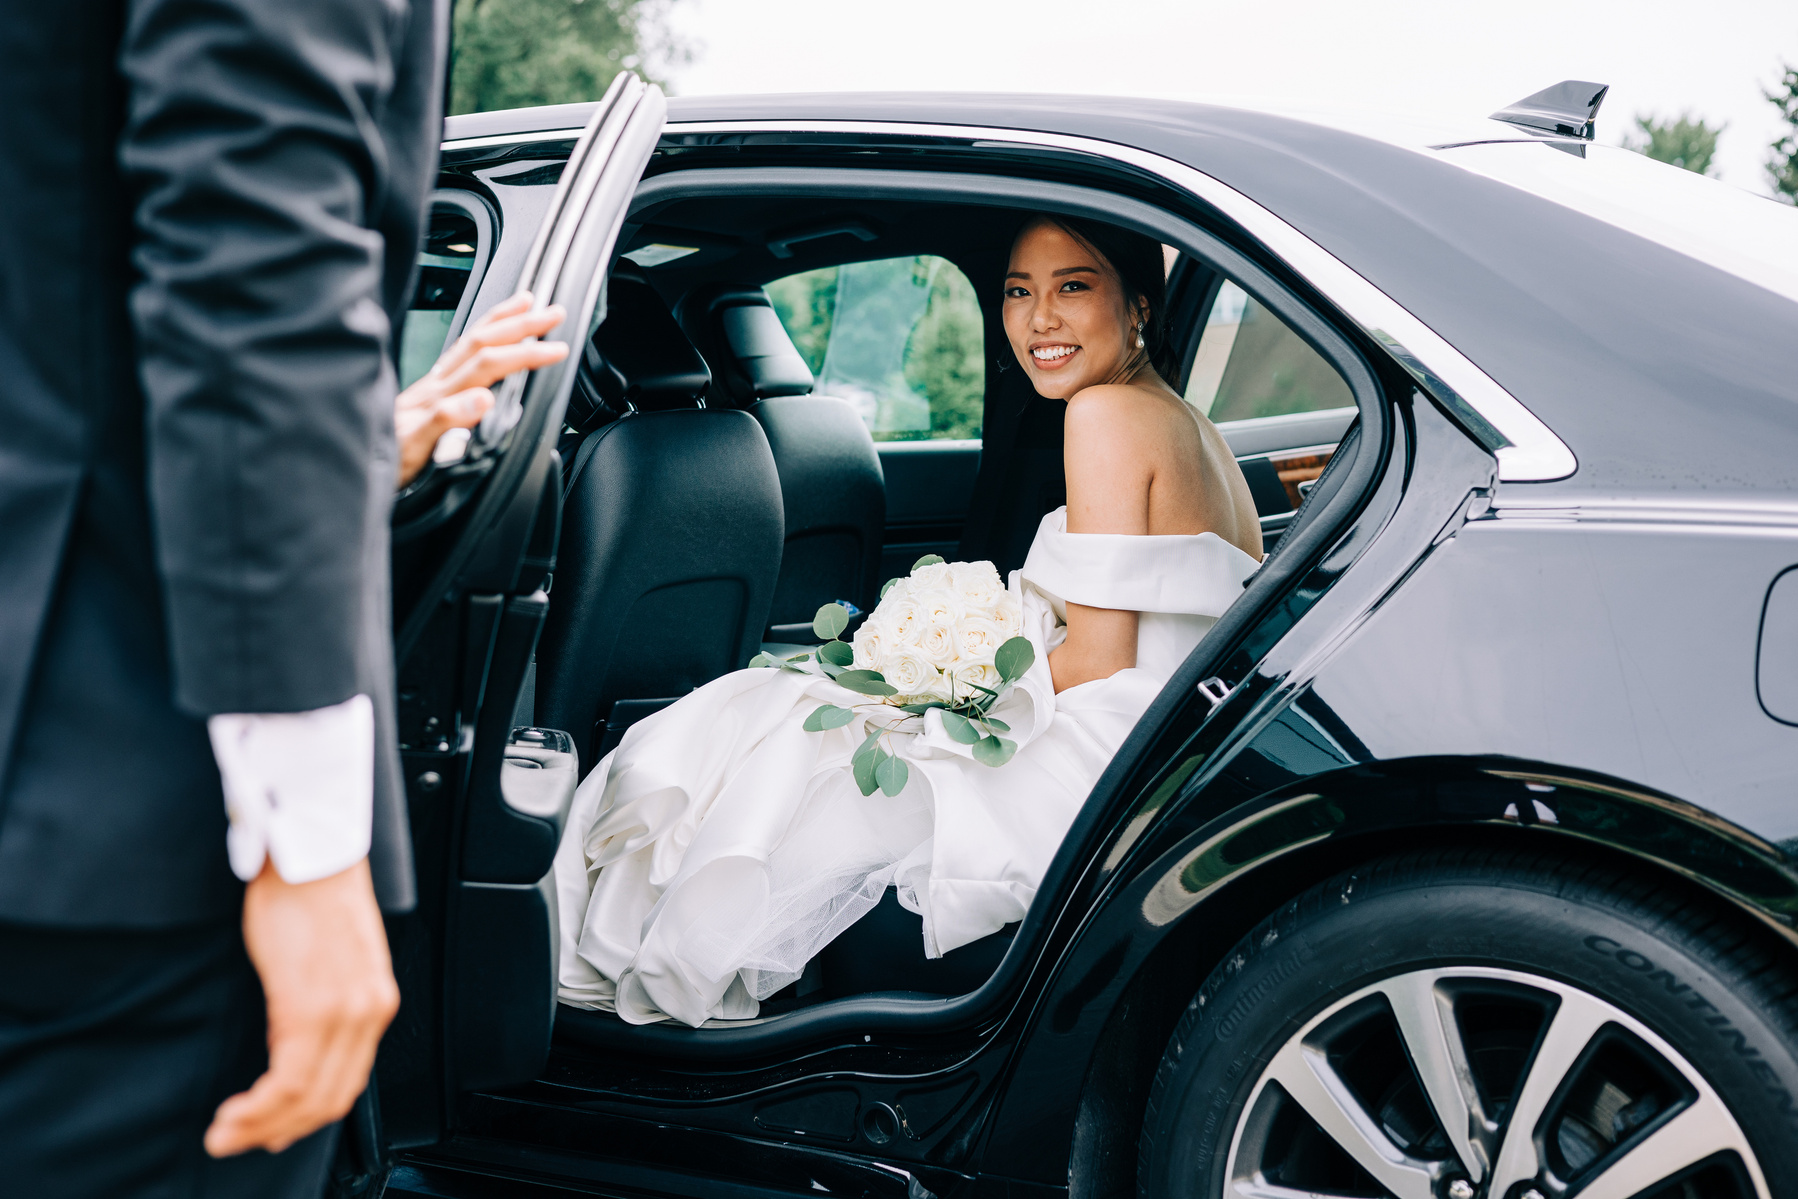 bride sits in a limo after their wedding ceremony as groom helps her in